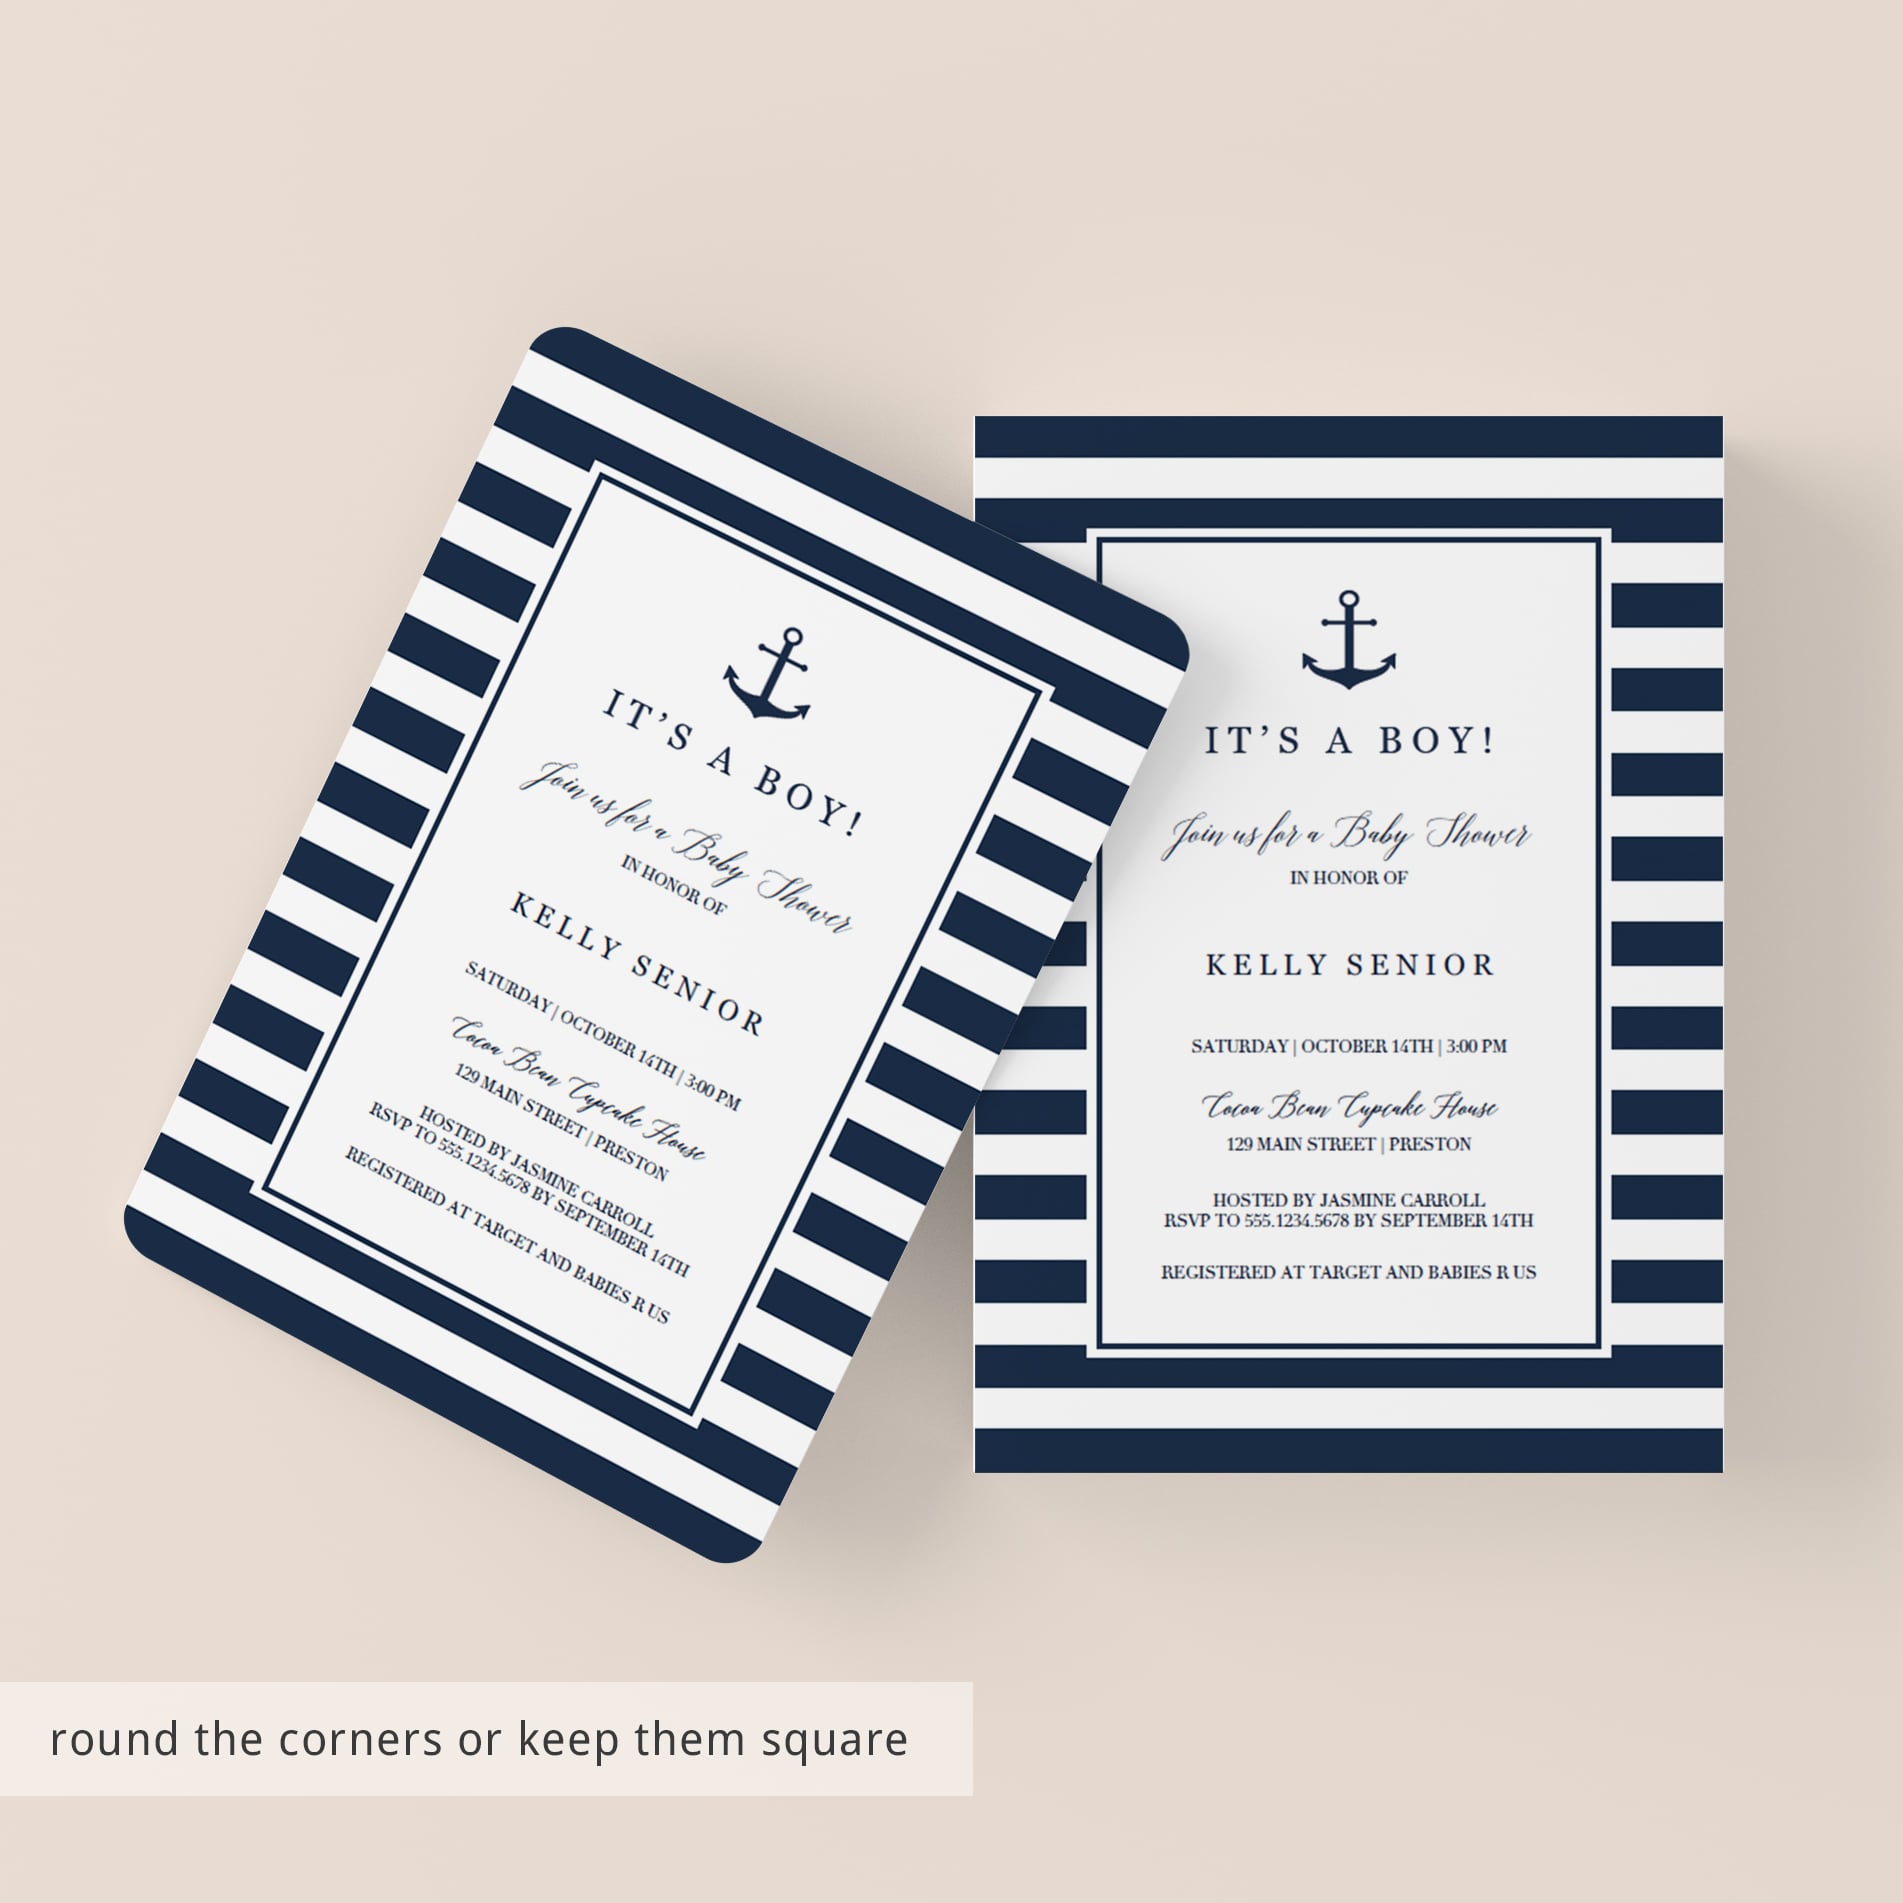 Nautical themed baby shower invitations by LittleSizzle